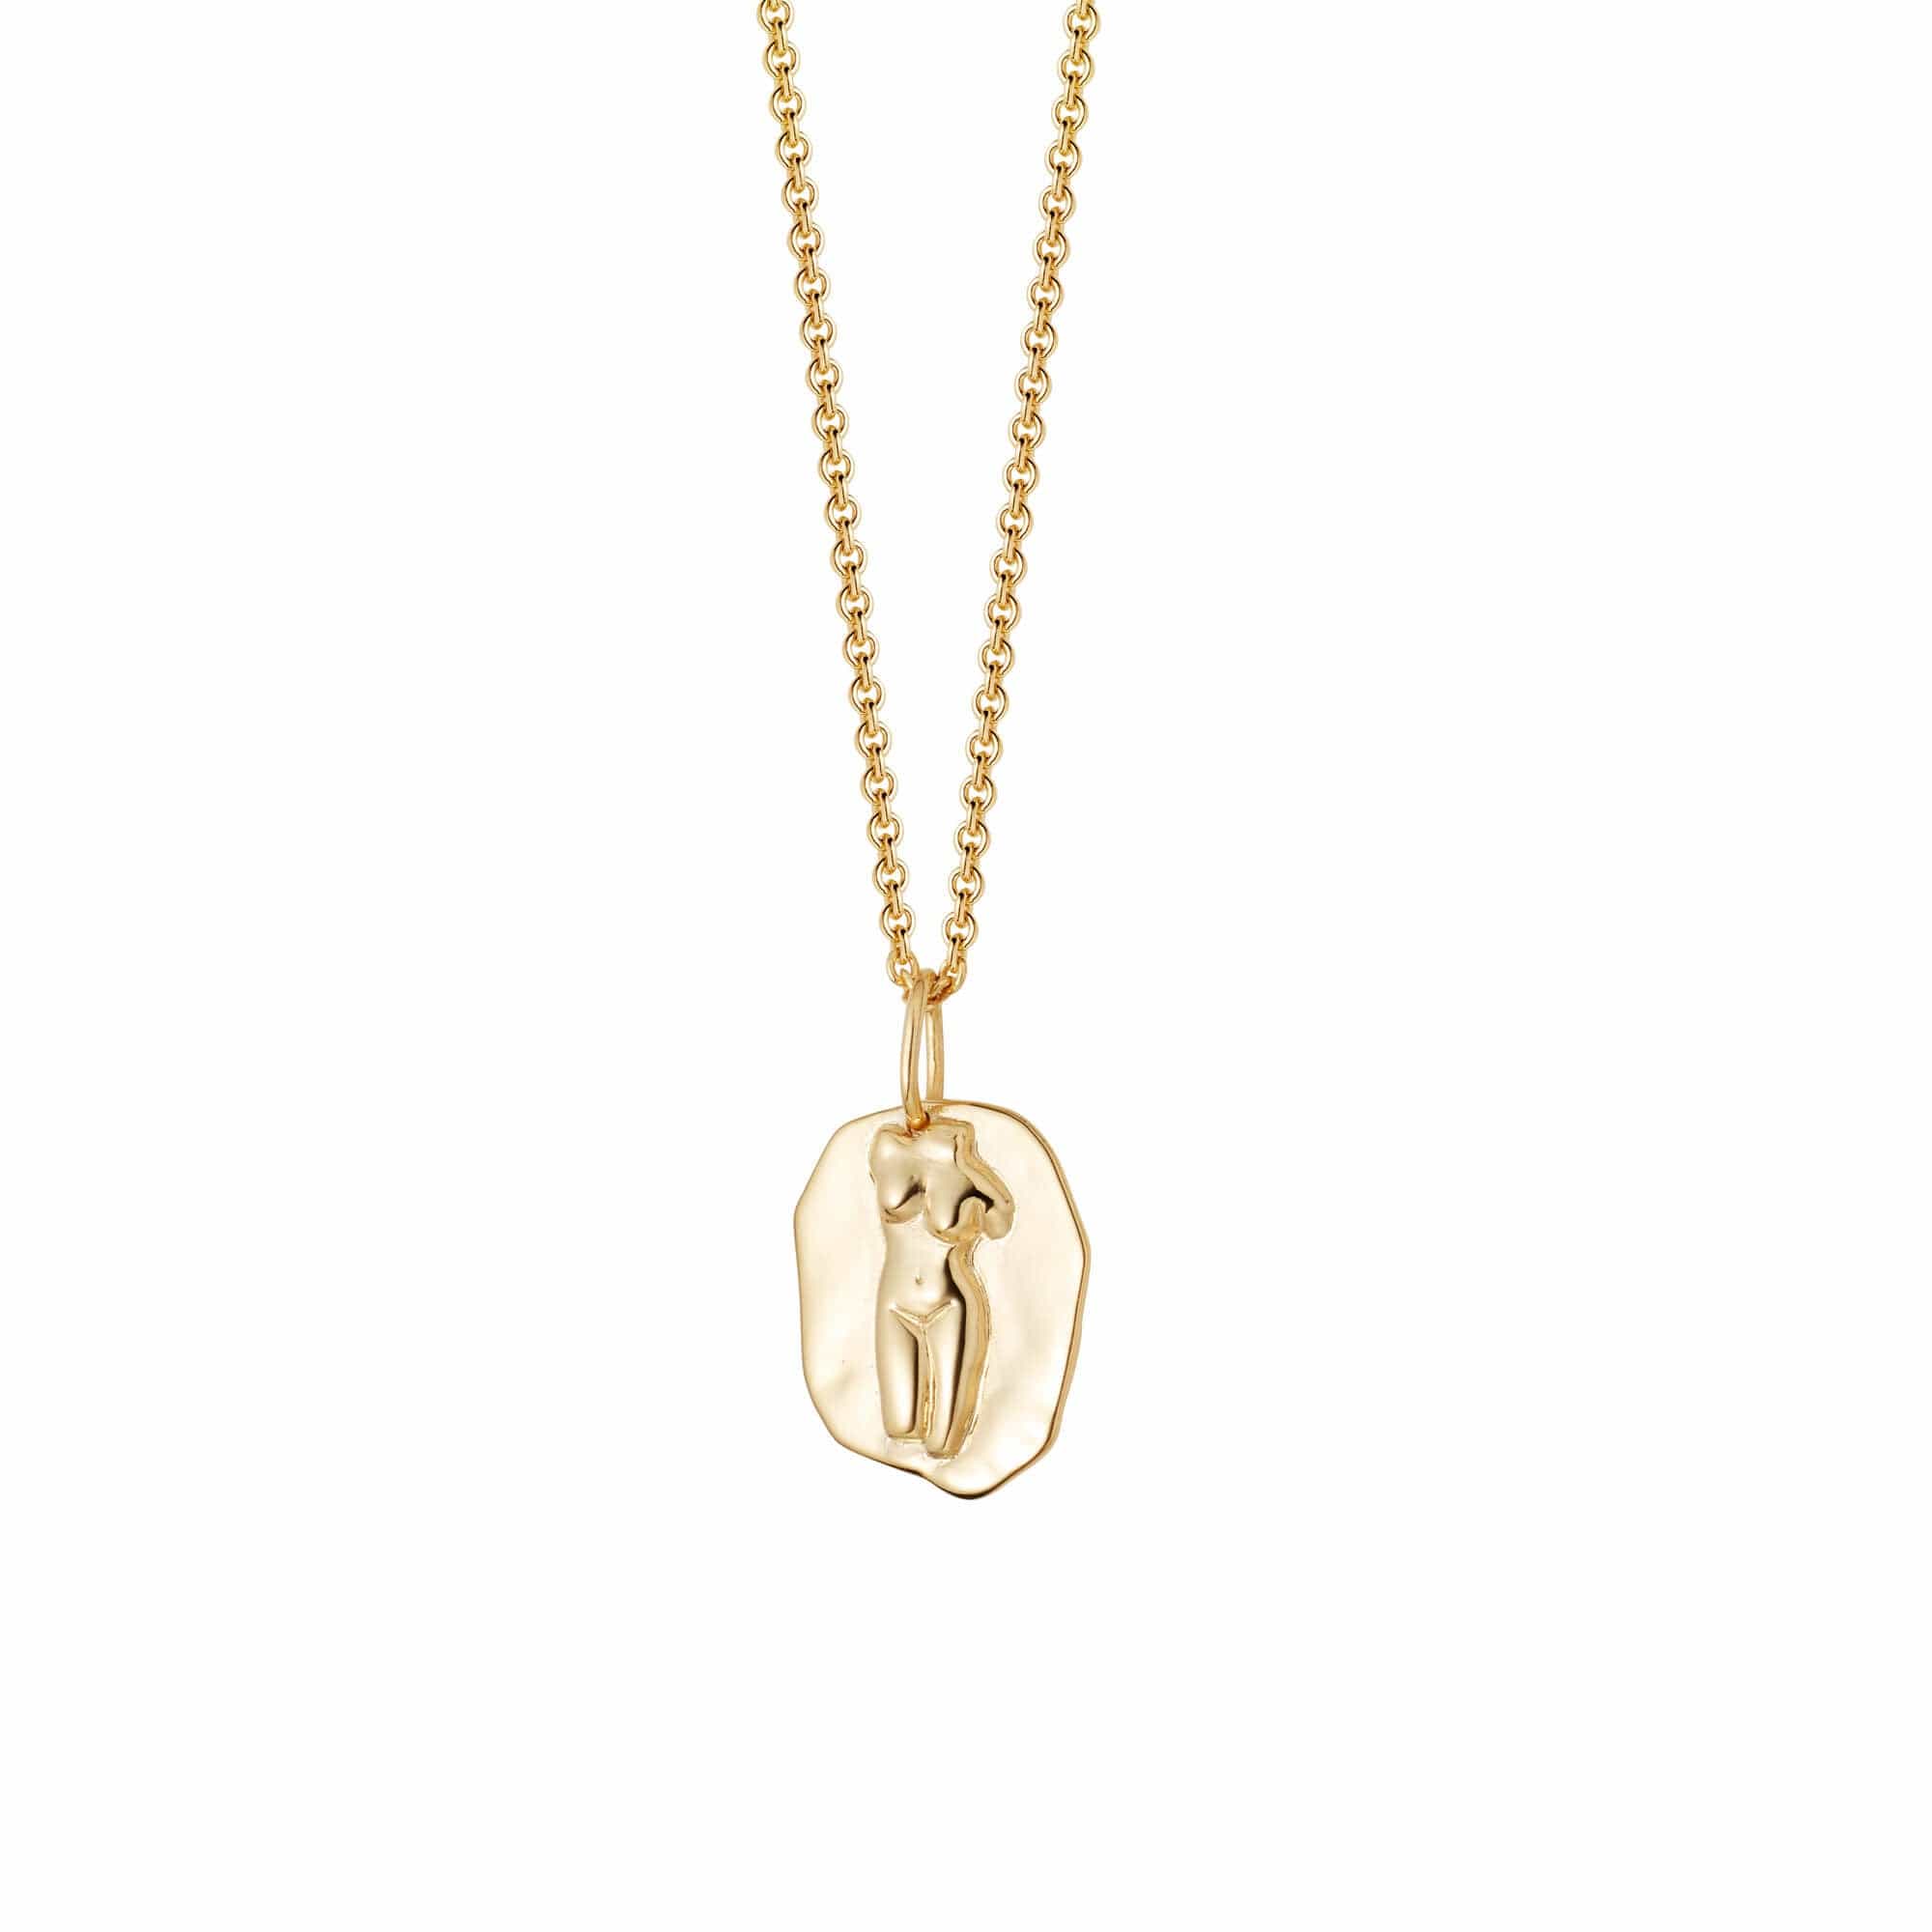 Aphrodite Coin Necklace in Gold Plating - MYKA